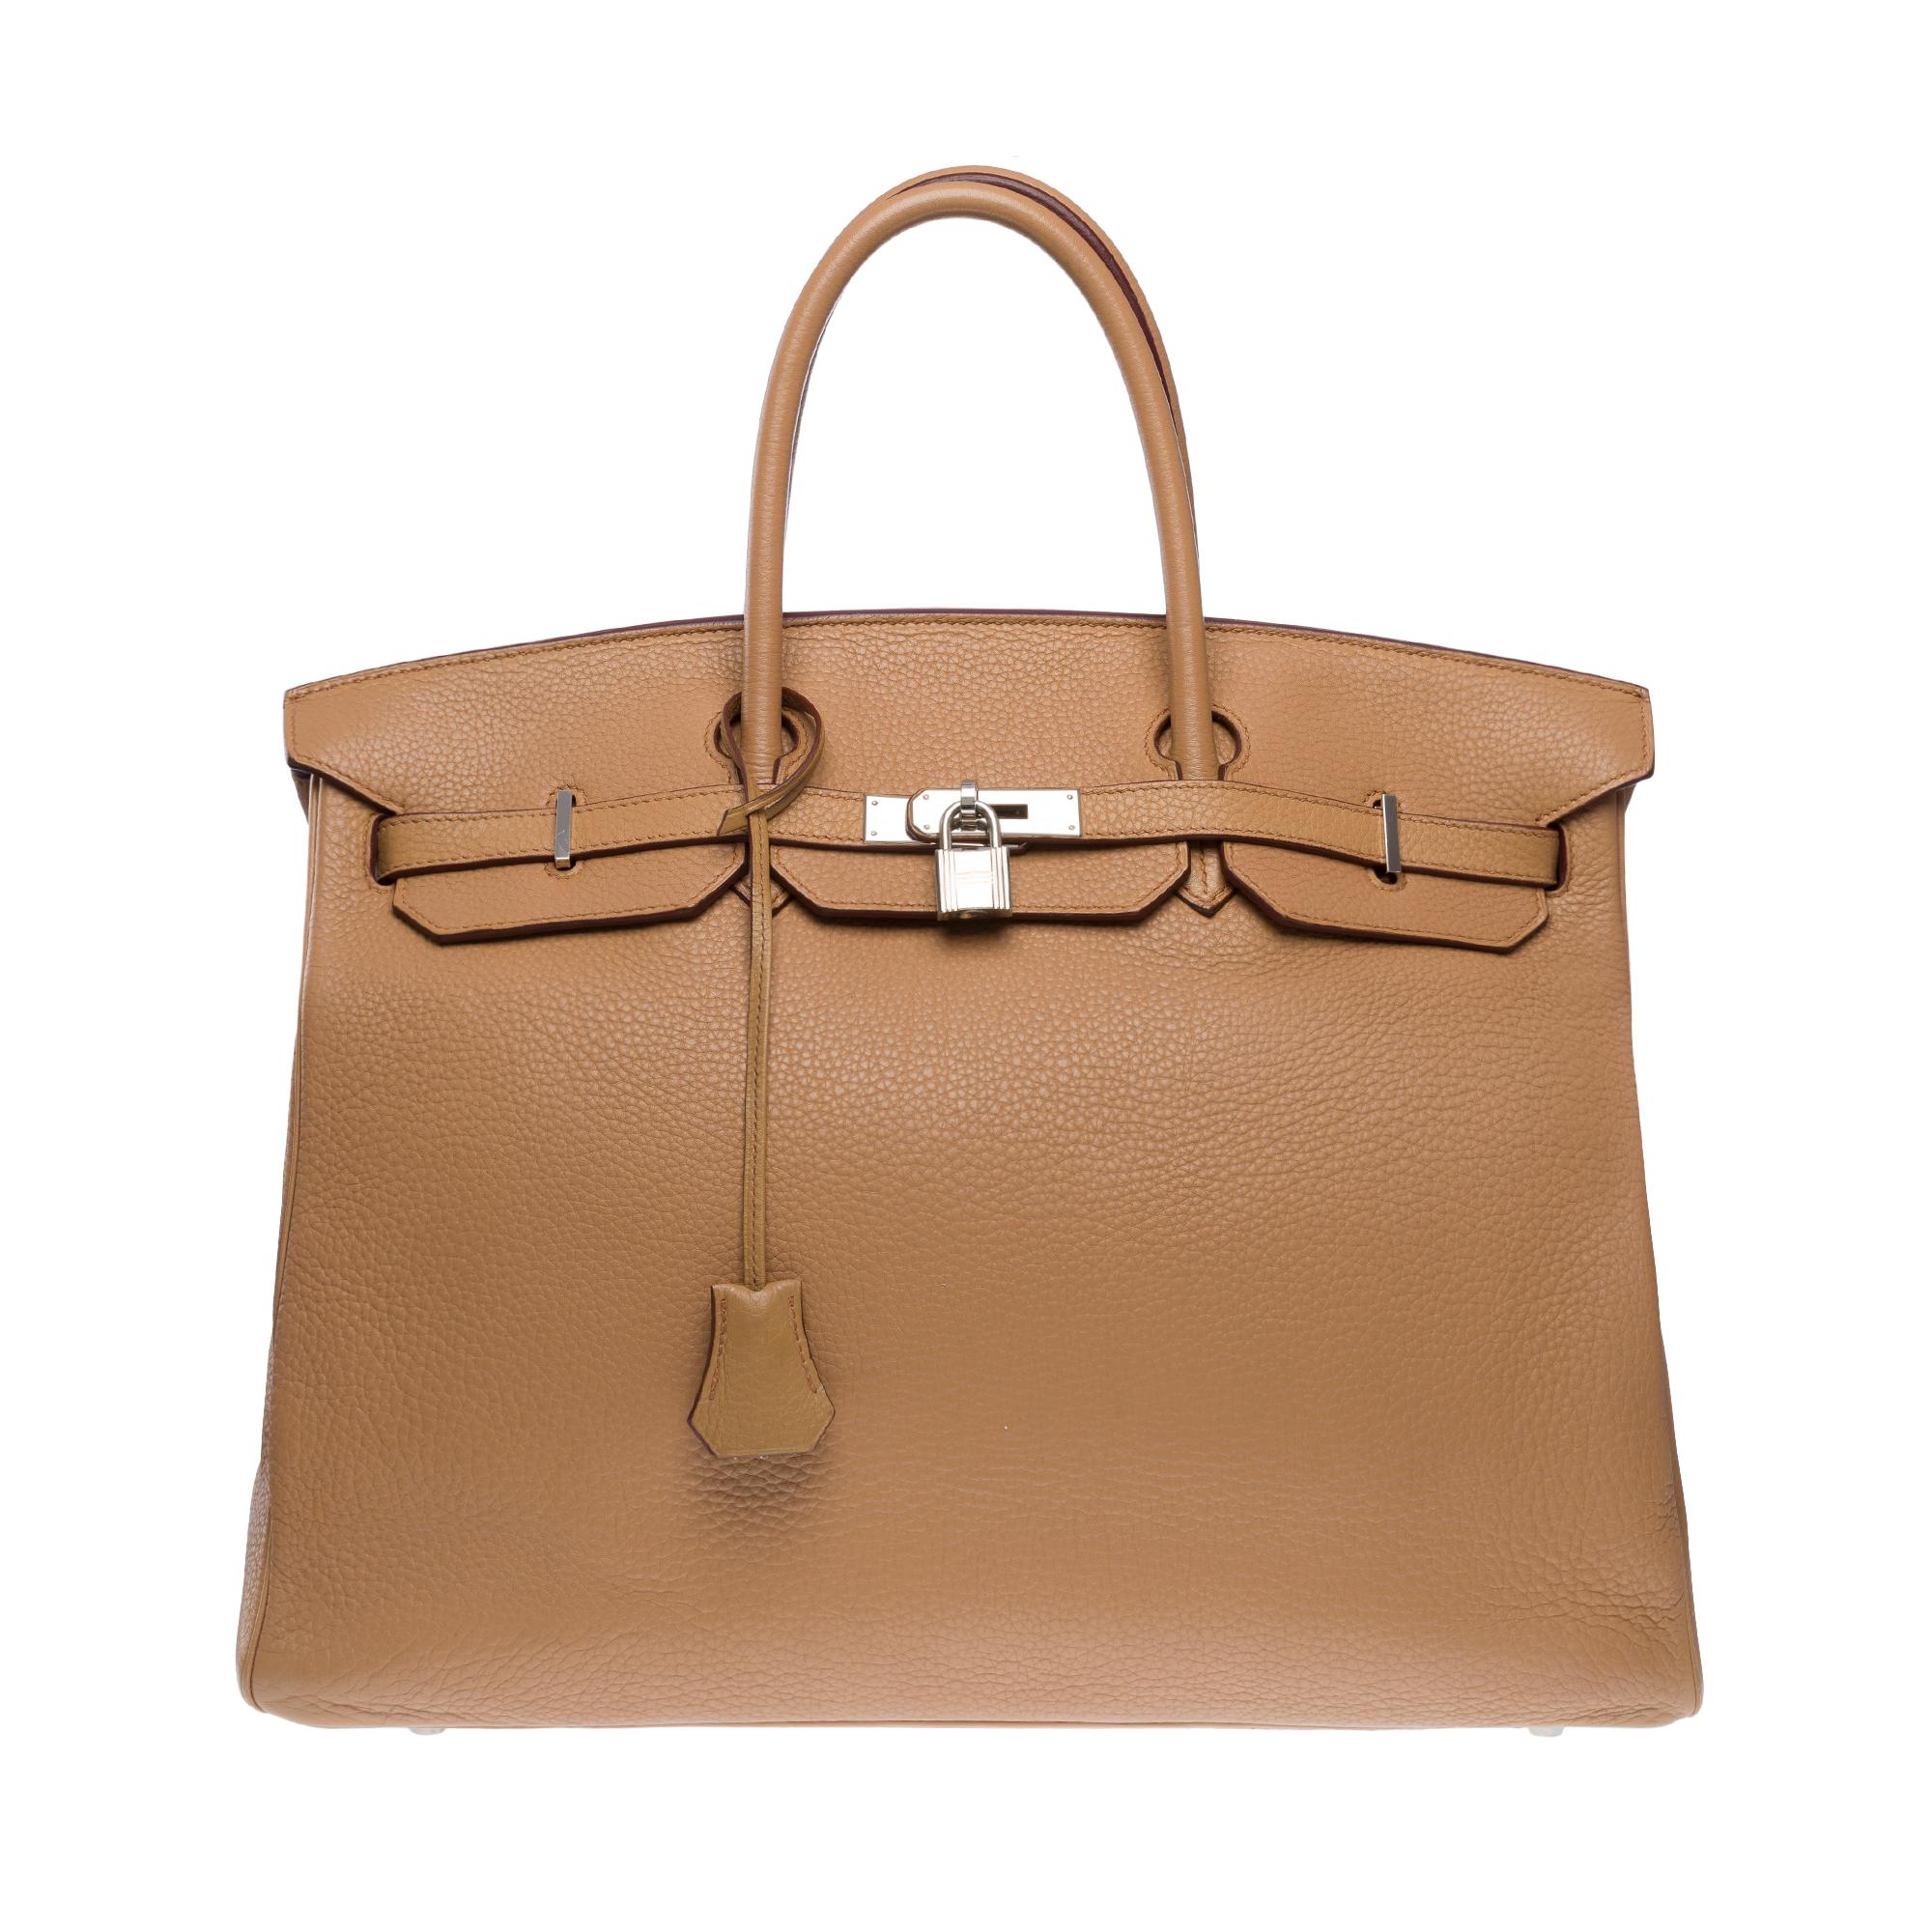 Hermes Birkin 40 handbag in Tabac Togo leather, SHW In Excellent Condition For Sale In Paris, IDF